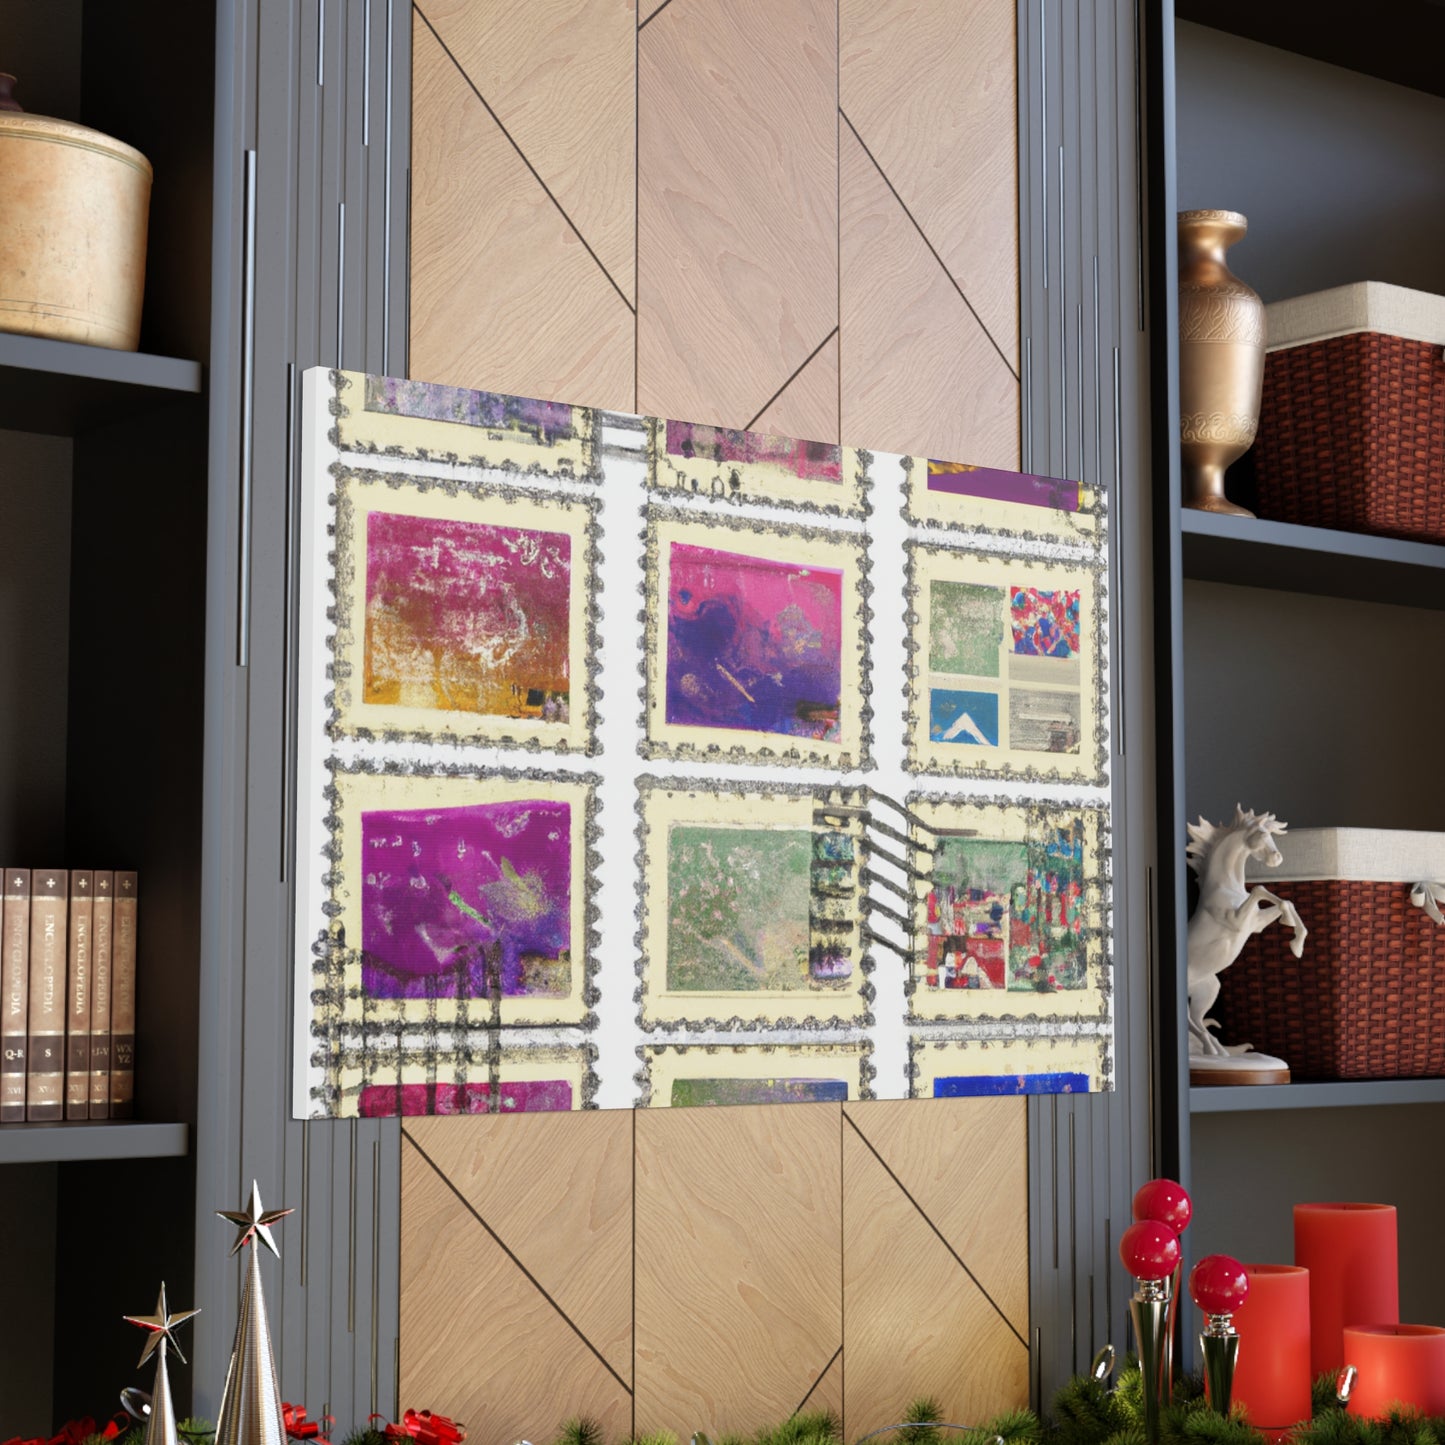 "Around the Globe Stamps" - Postage Stamp Collector Canvas Wall Art